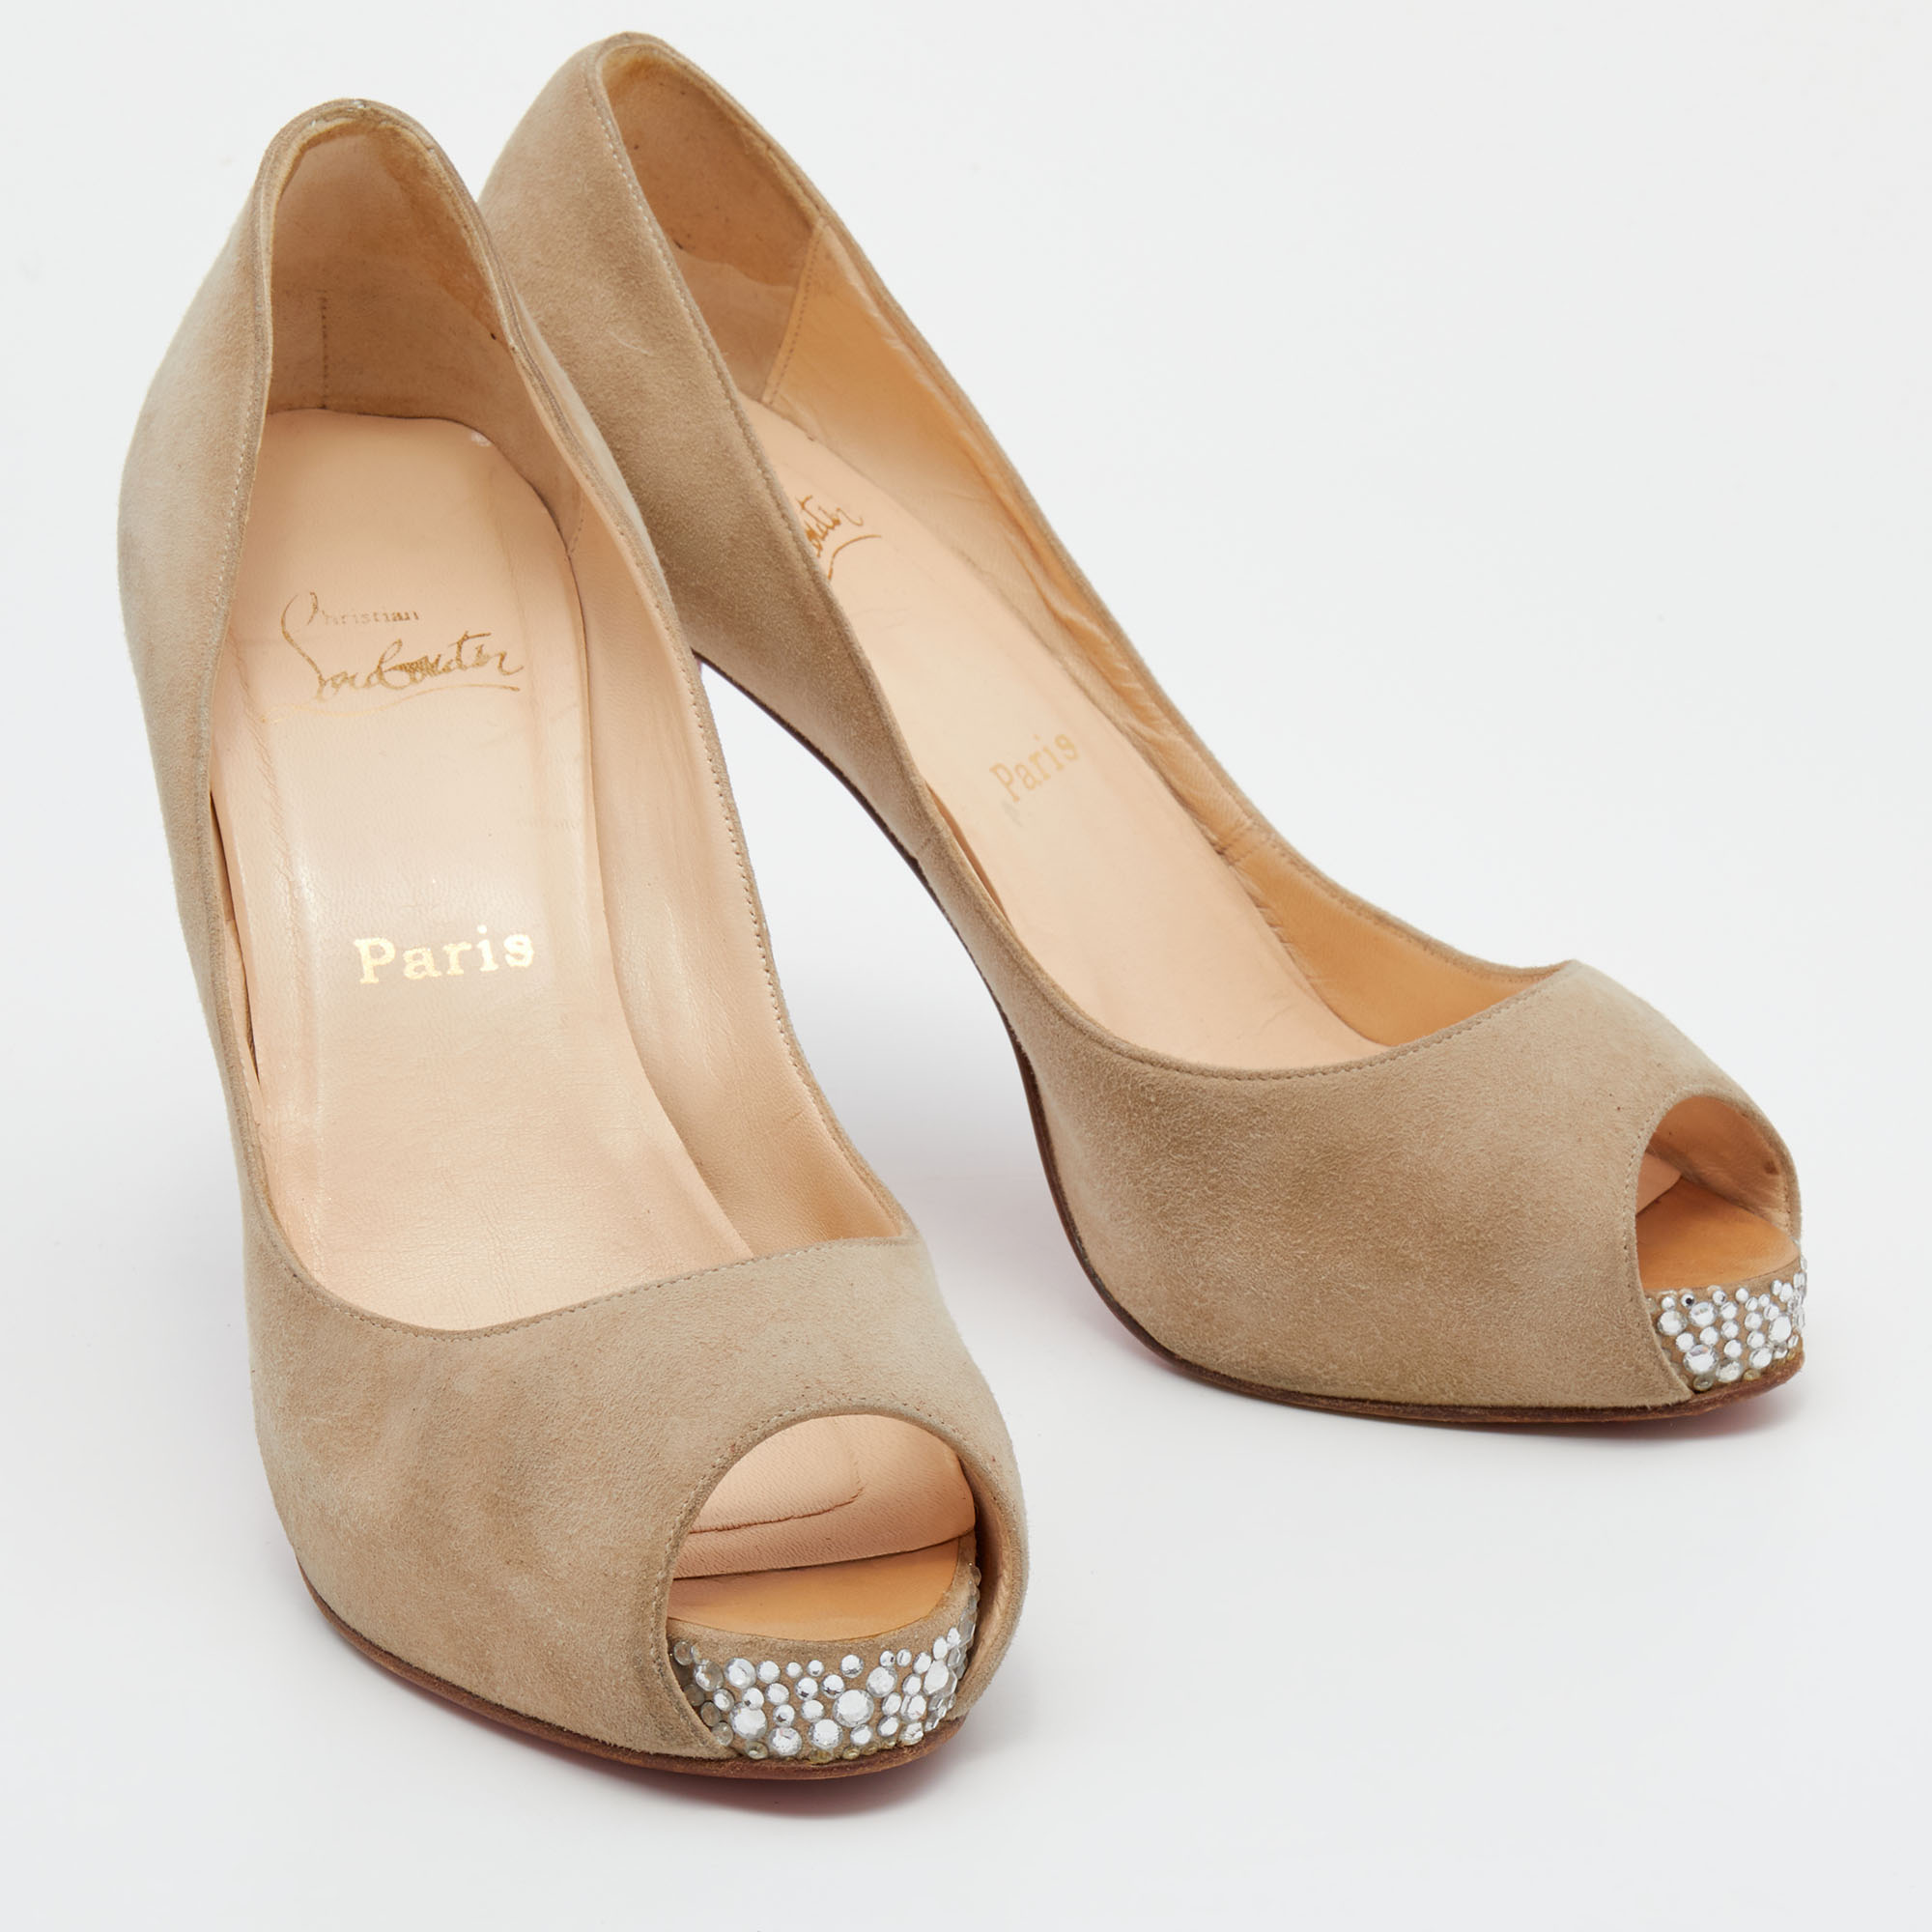 Christian Louboutin Beige Suede Very Prive Crystal Embellished Peep Toe Pumps Size 38.5